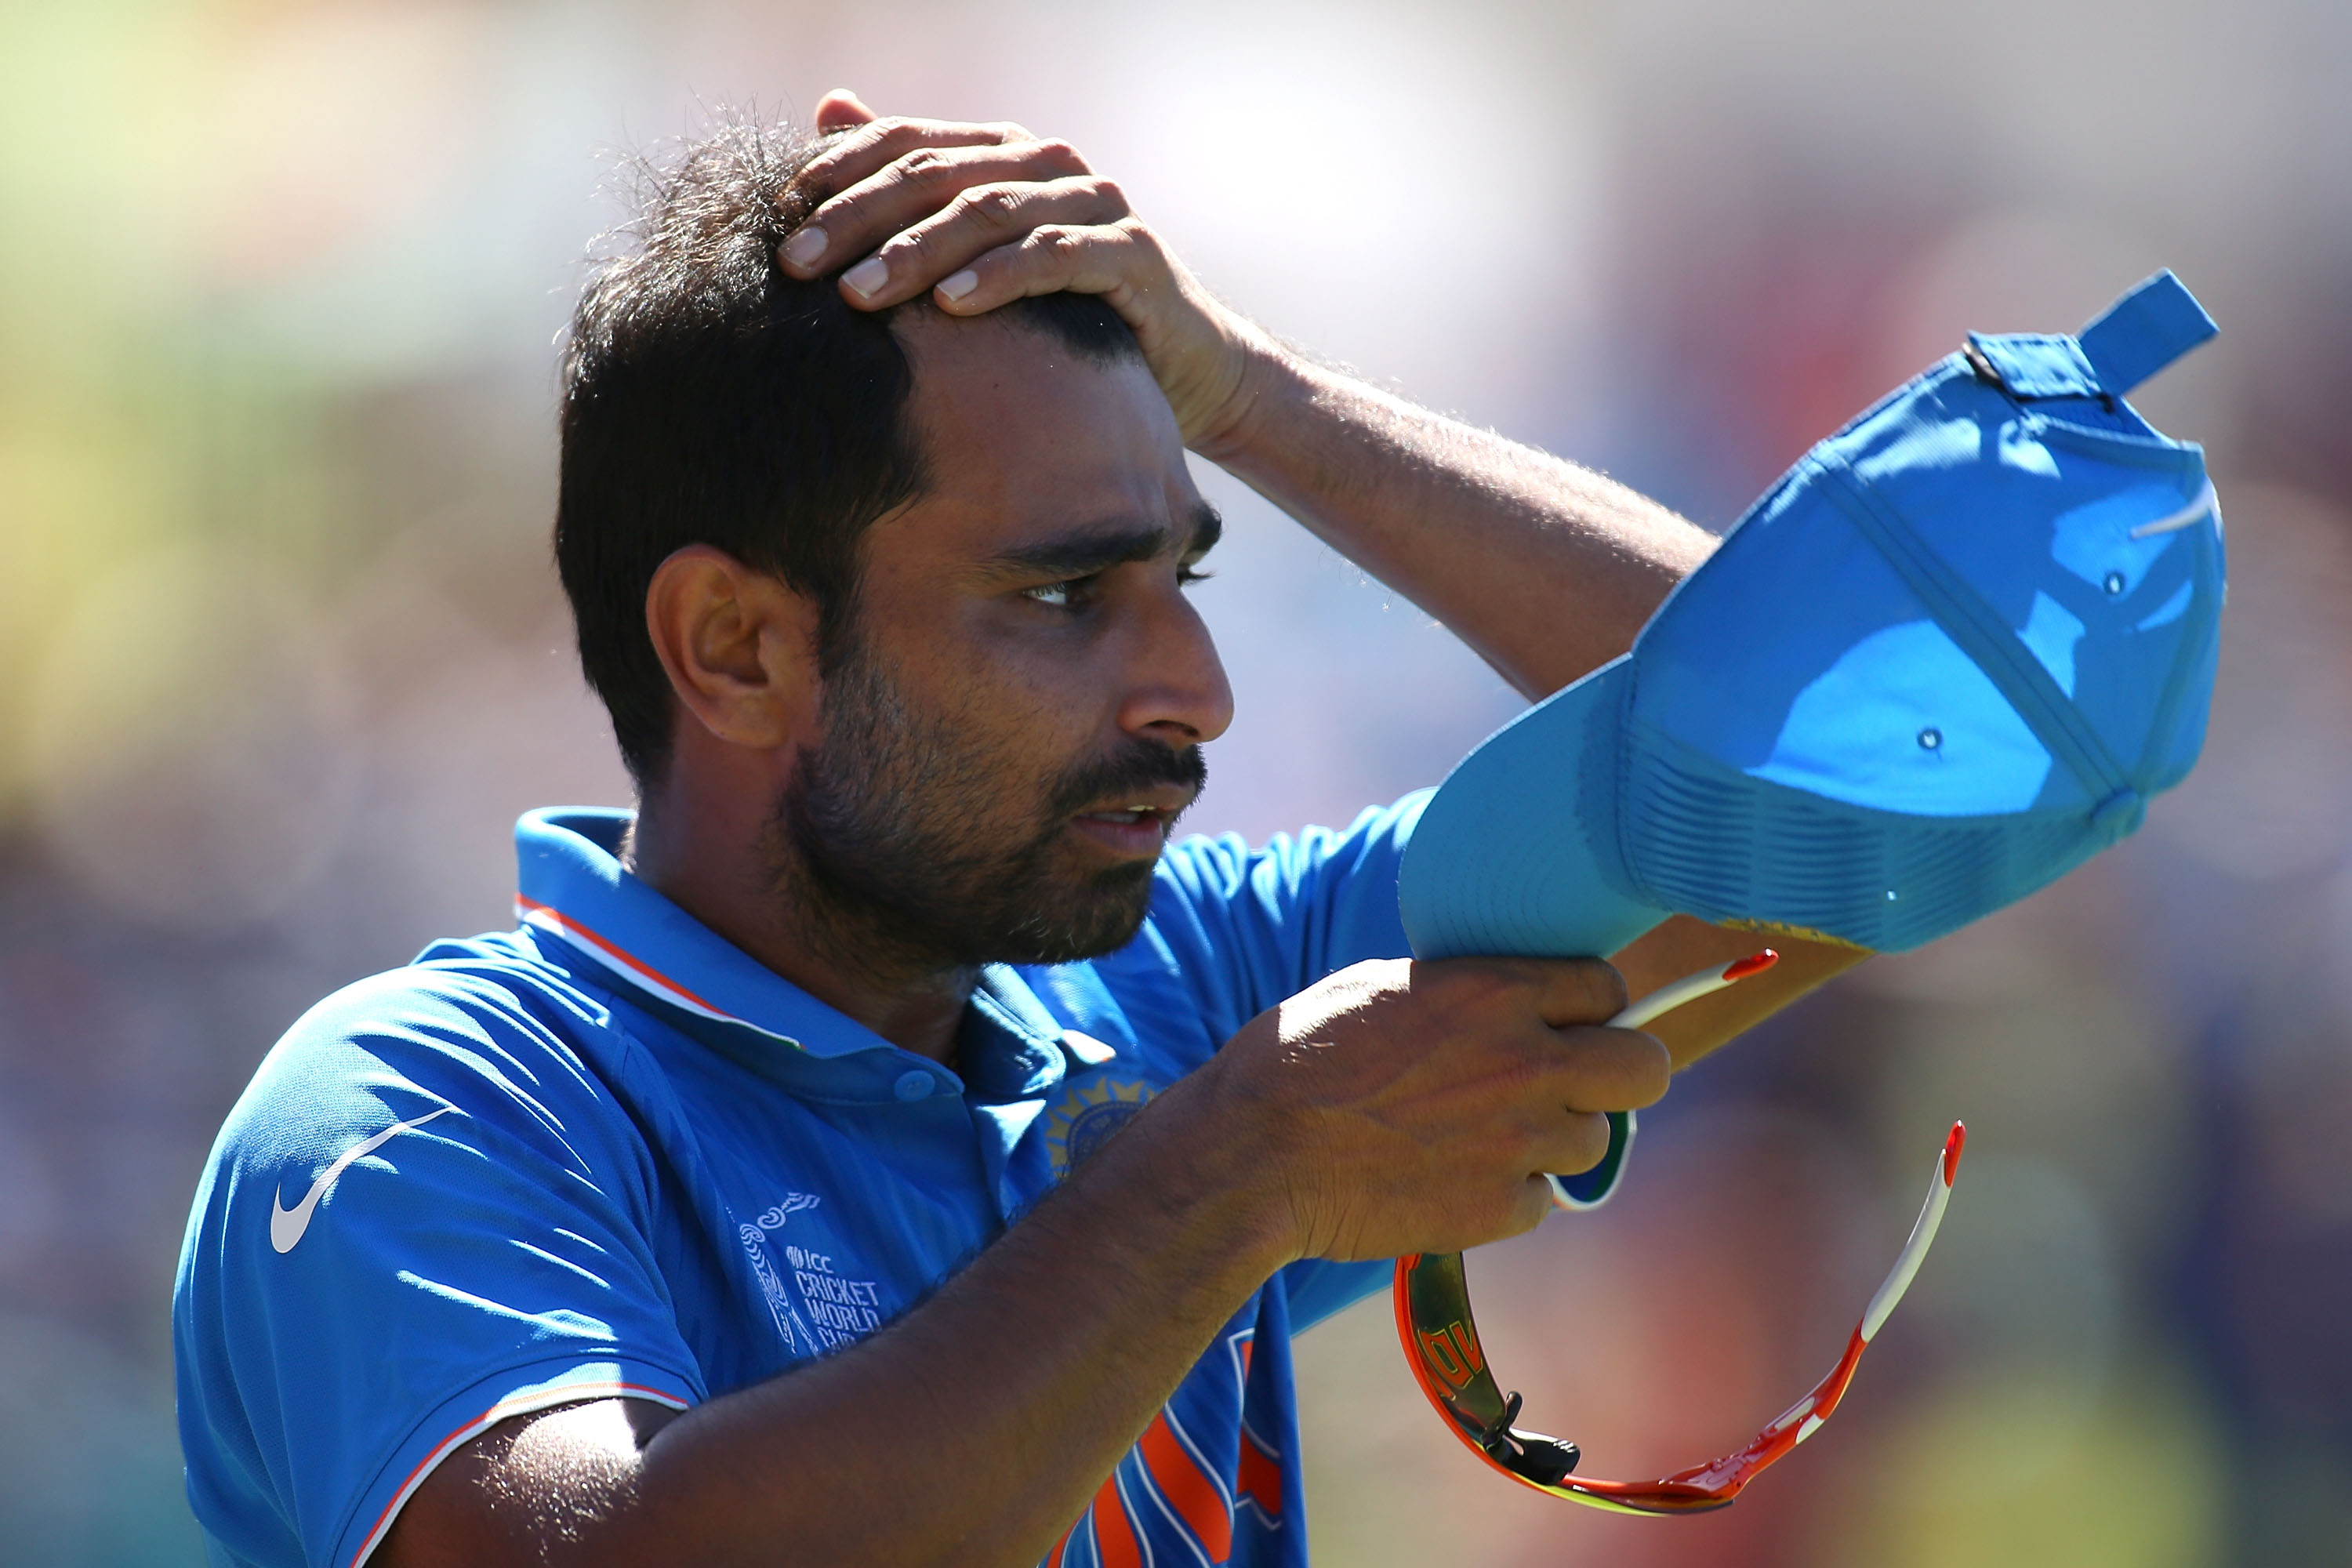 Reports : Decision to withhold Mohammed Shami’s annual contact wasn't unanimous